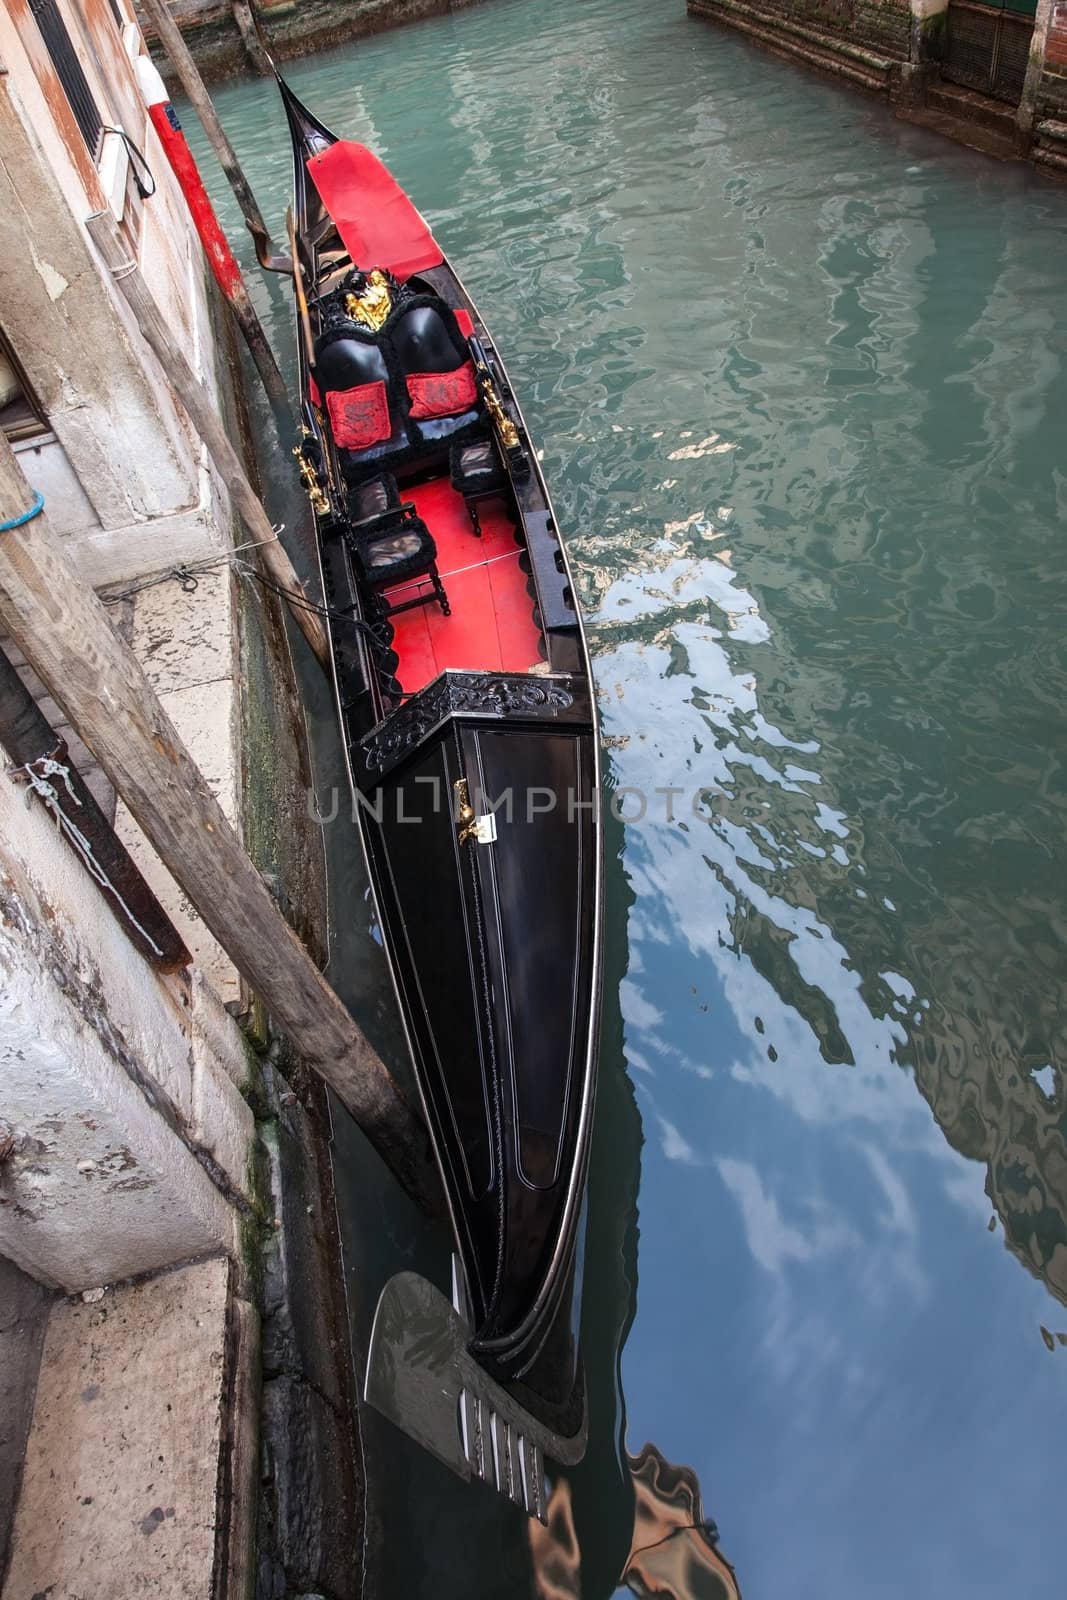 A gondola parked near a wall of a building on a Venetian canal.